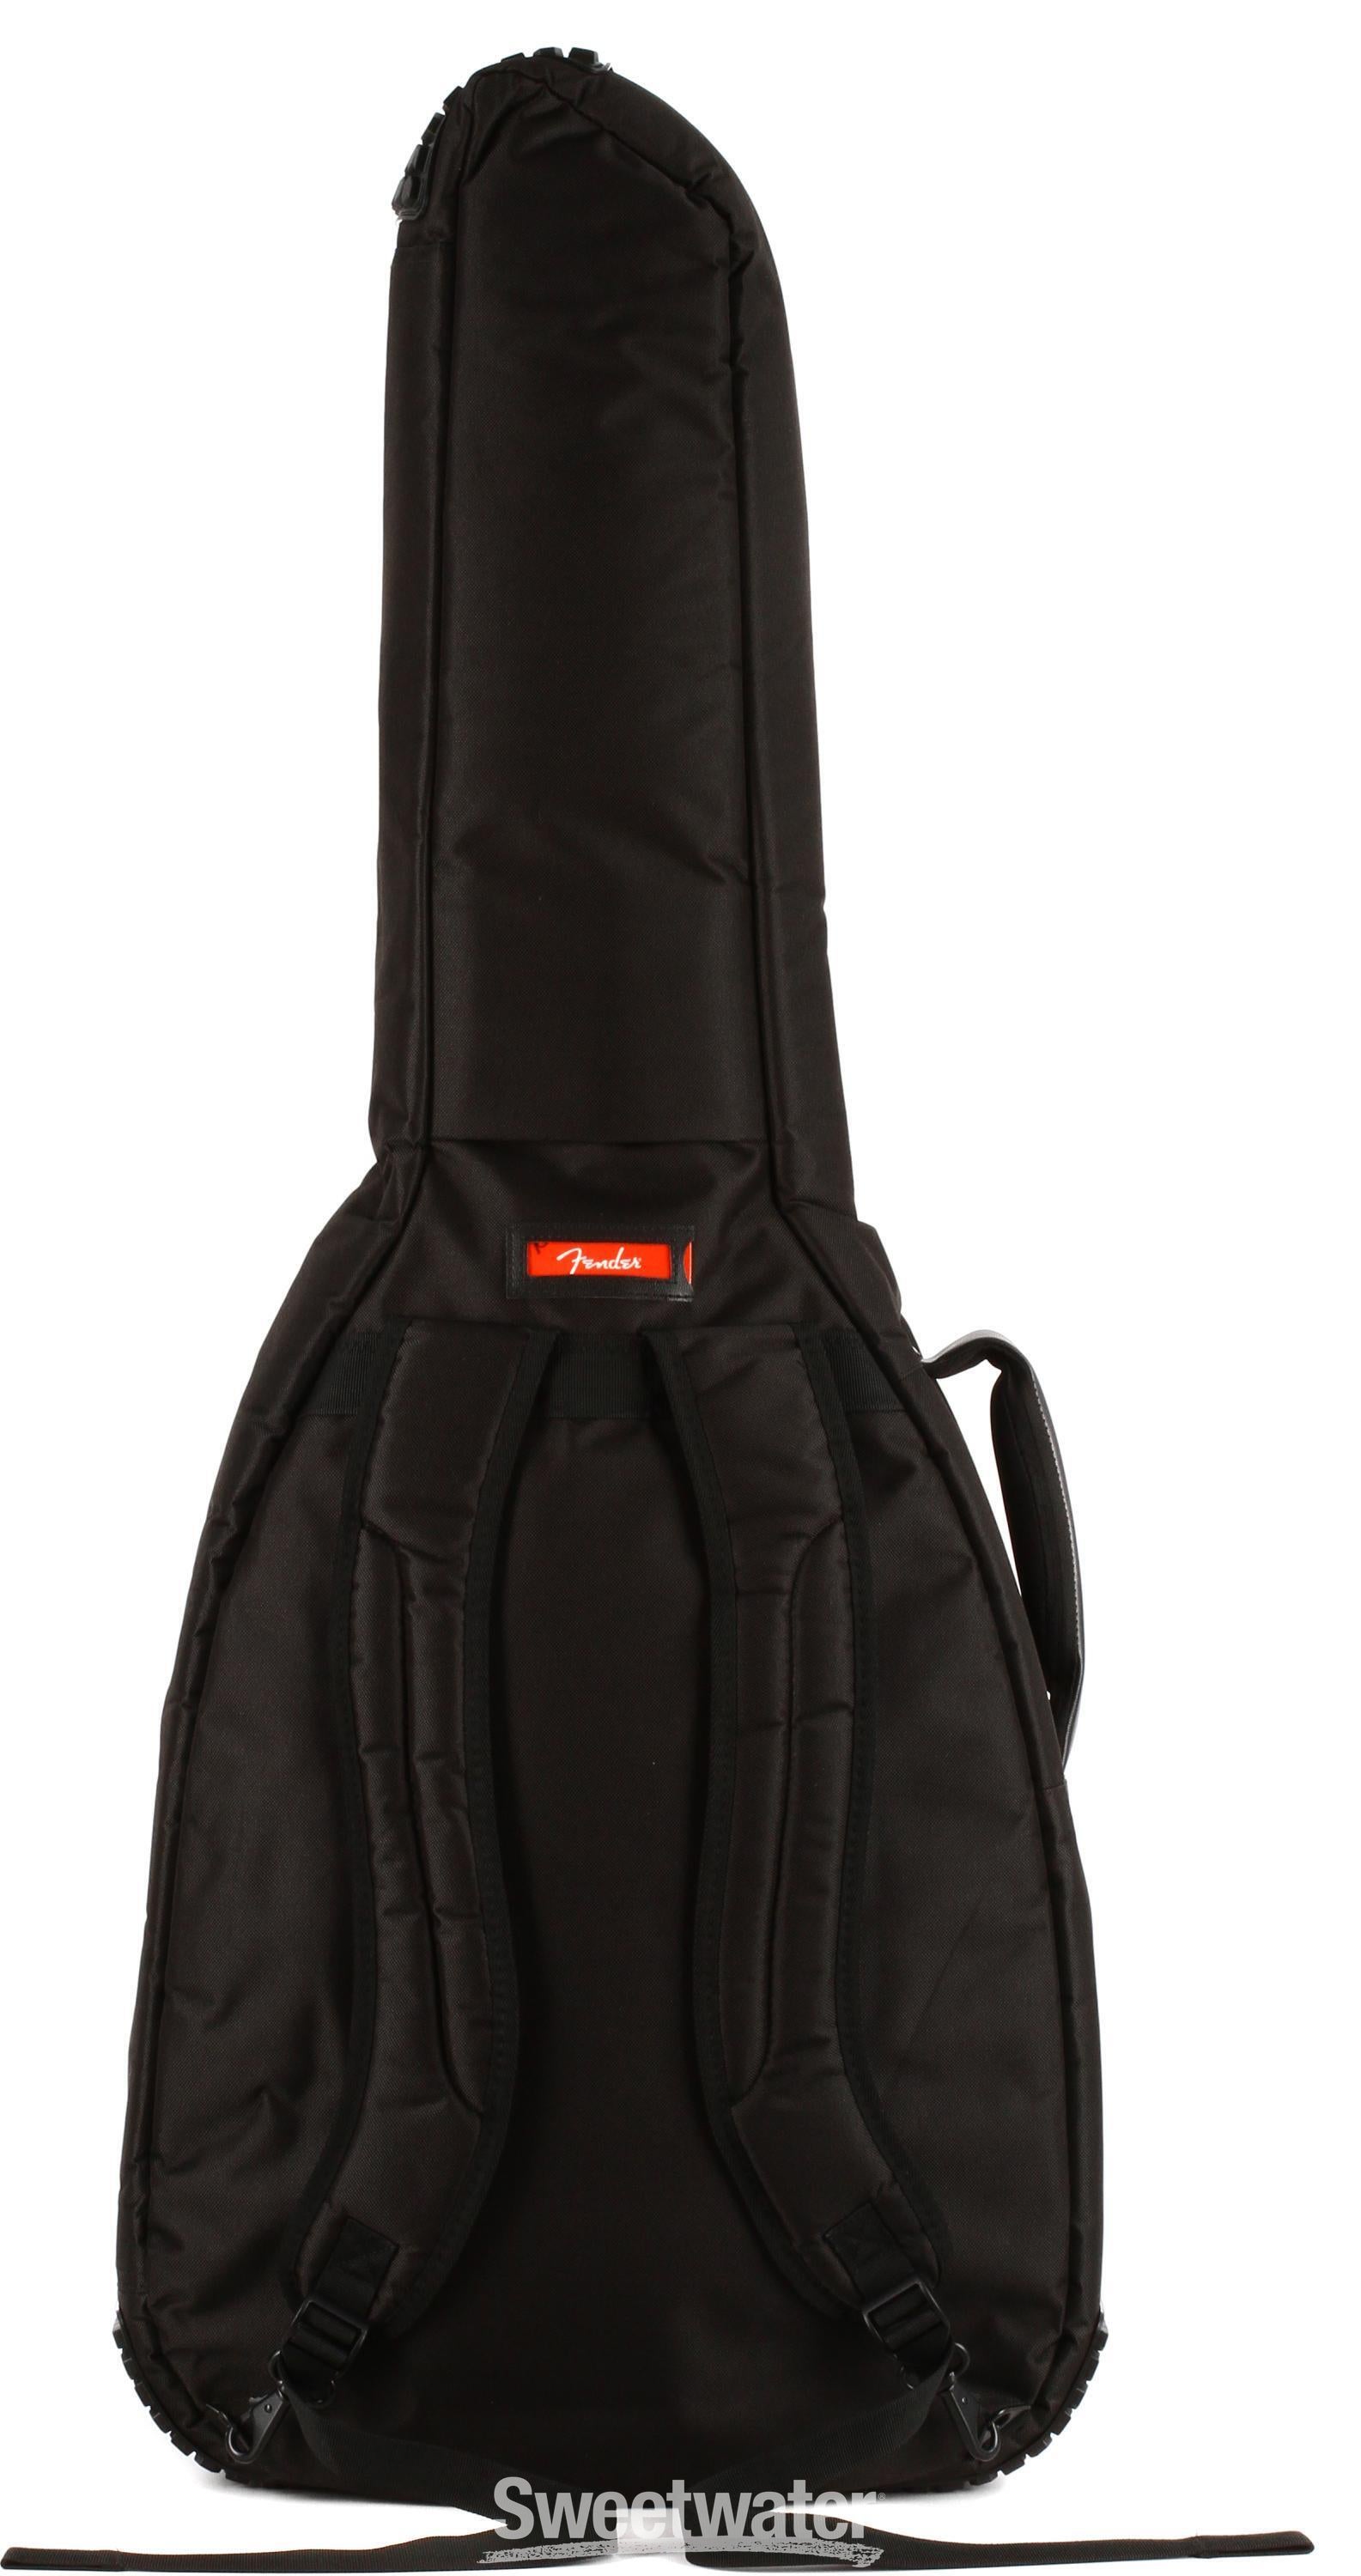 Fender FA610 Dreadnought Gig Bag - Black Reviews | Sweetwater